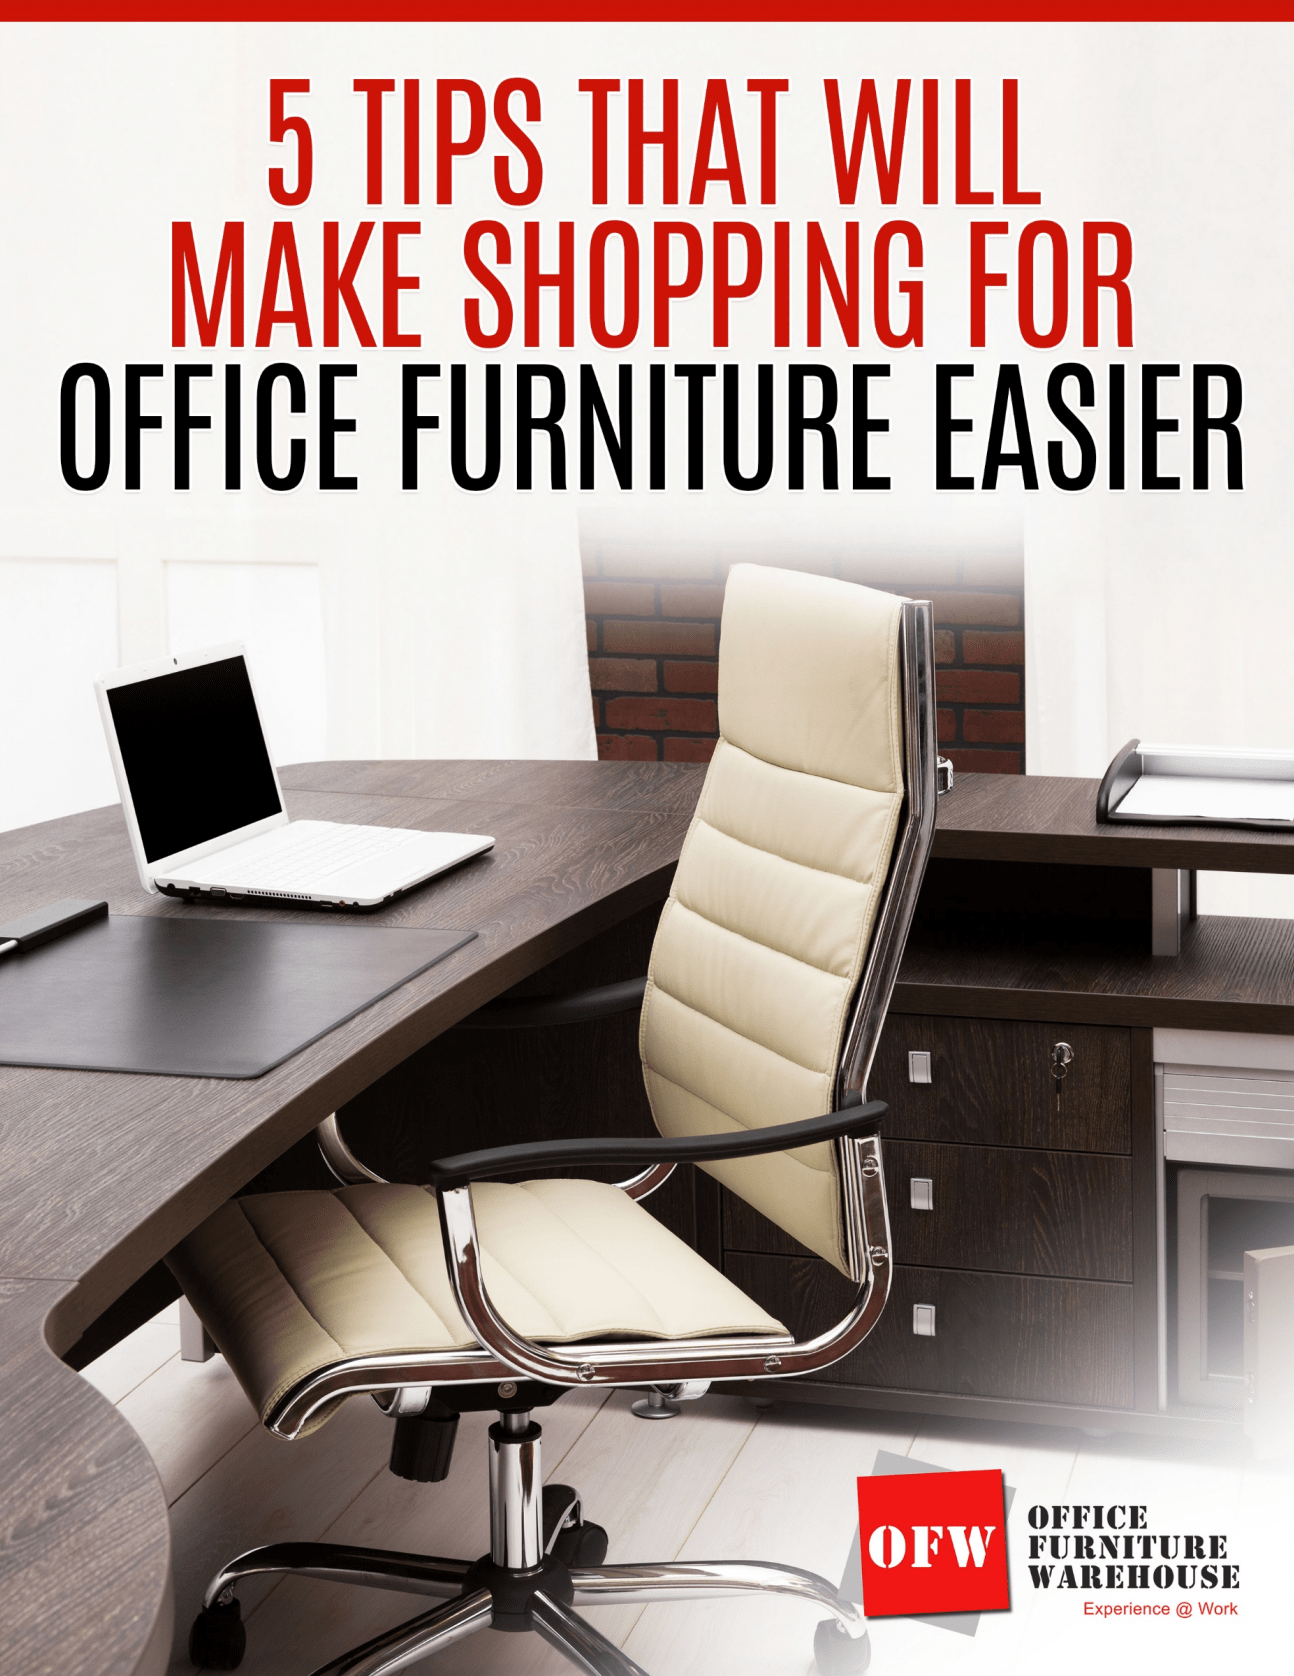 https://officefurnitureonline.com/wp-content/uploads/2021/09/5-Tips-That-Will-make-Shopping-For-Office-Furniture-Easier-min.png